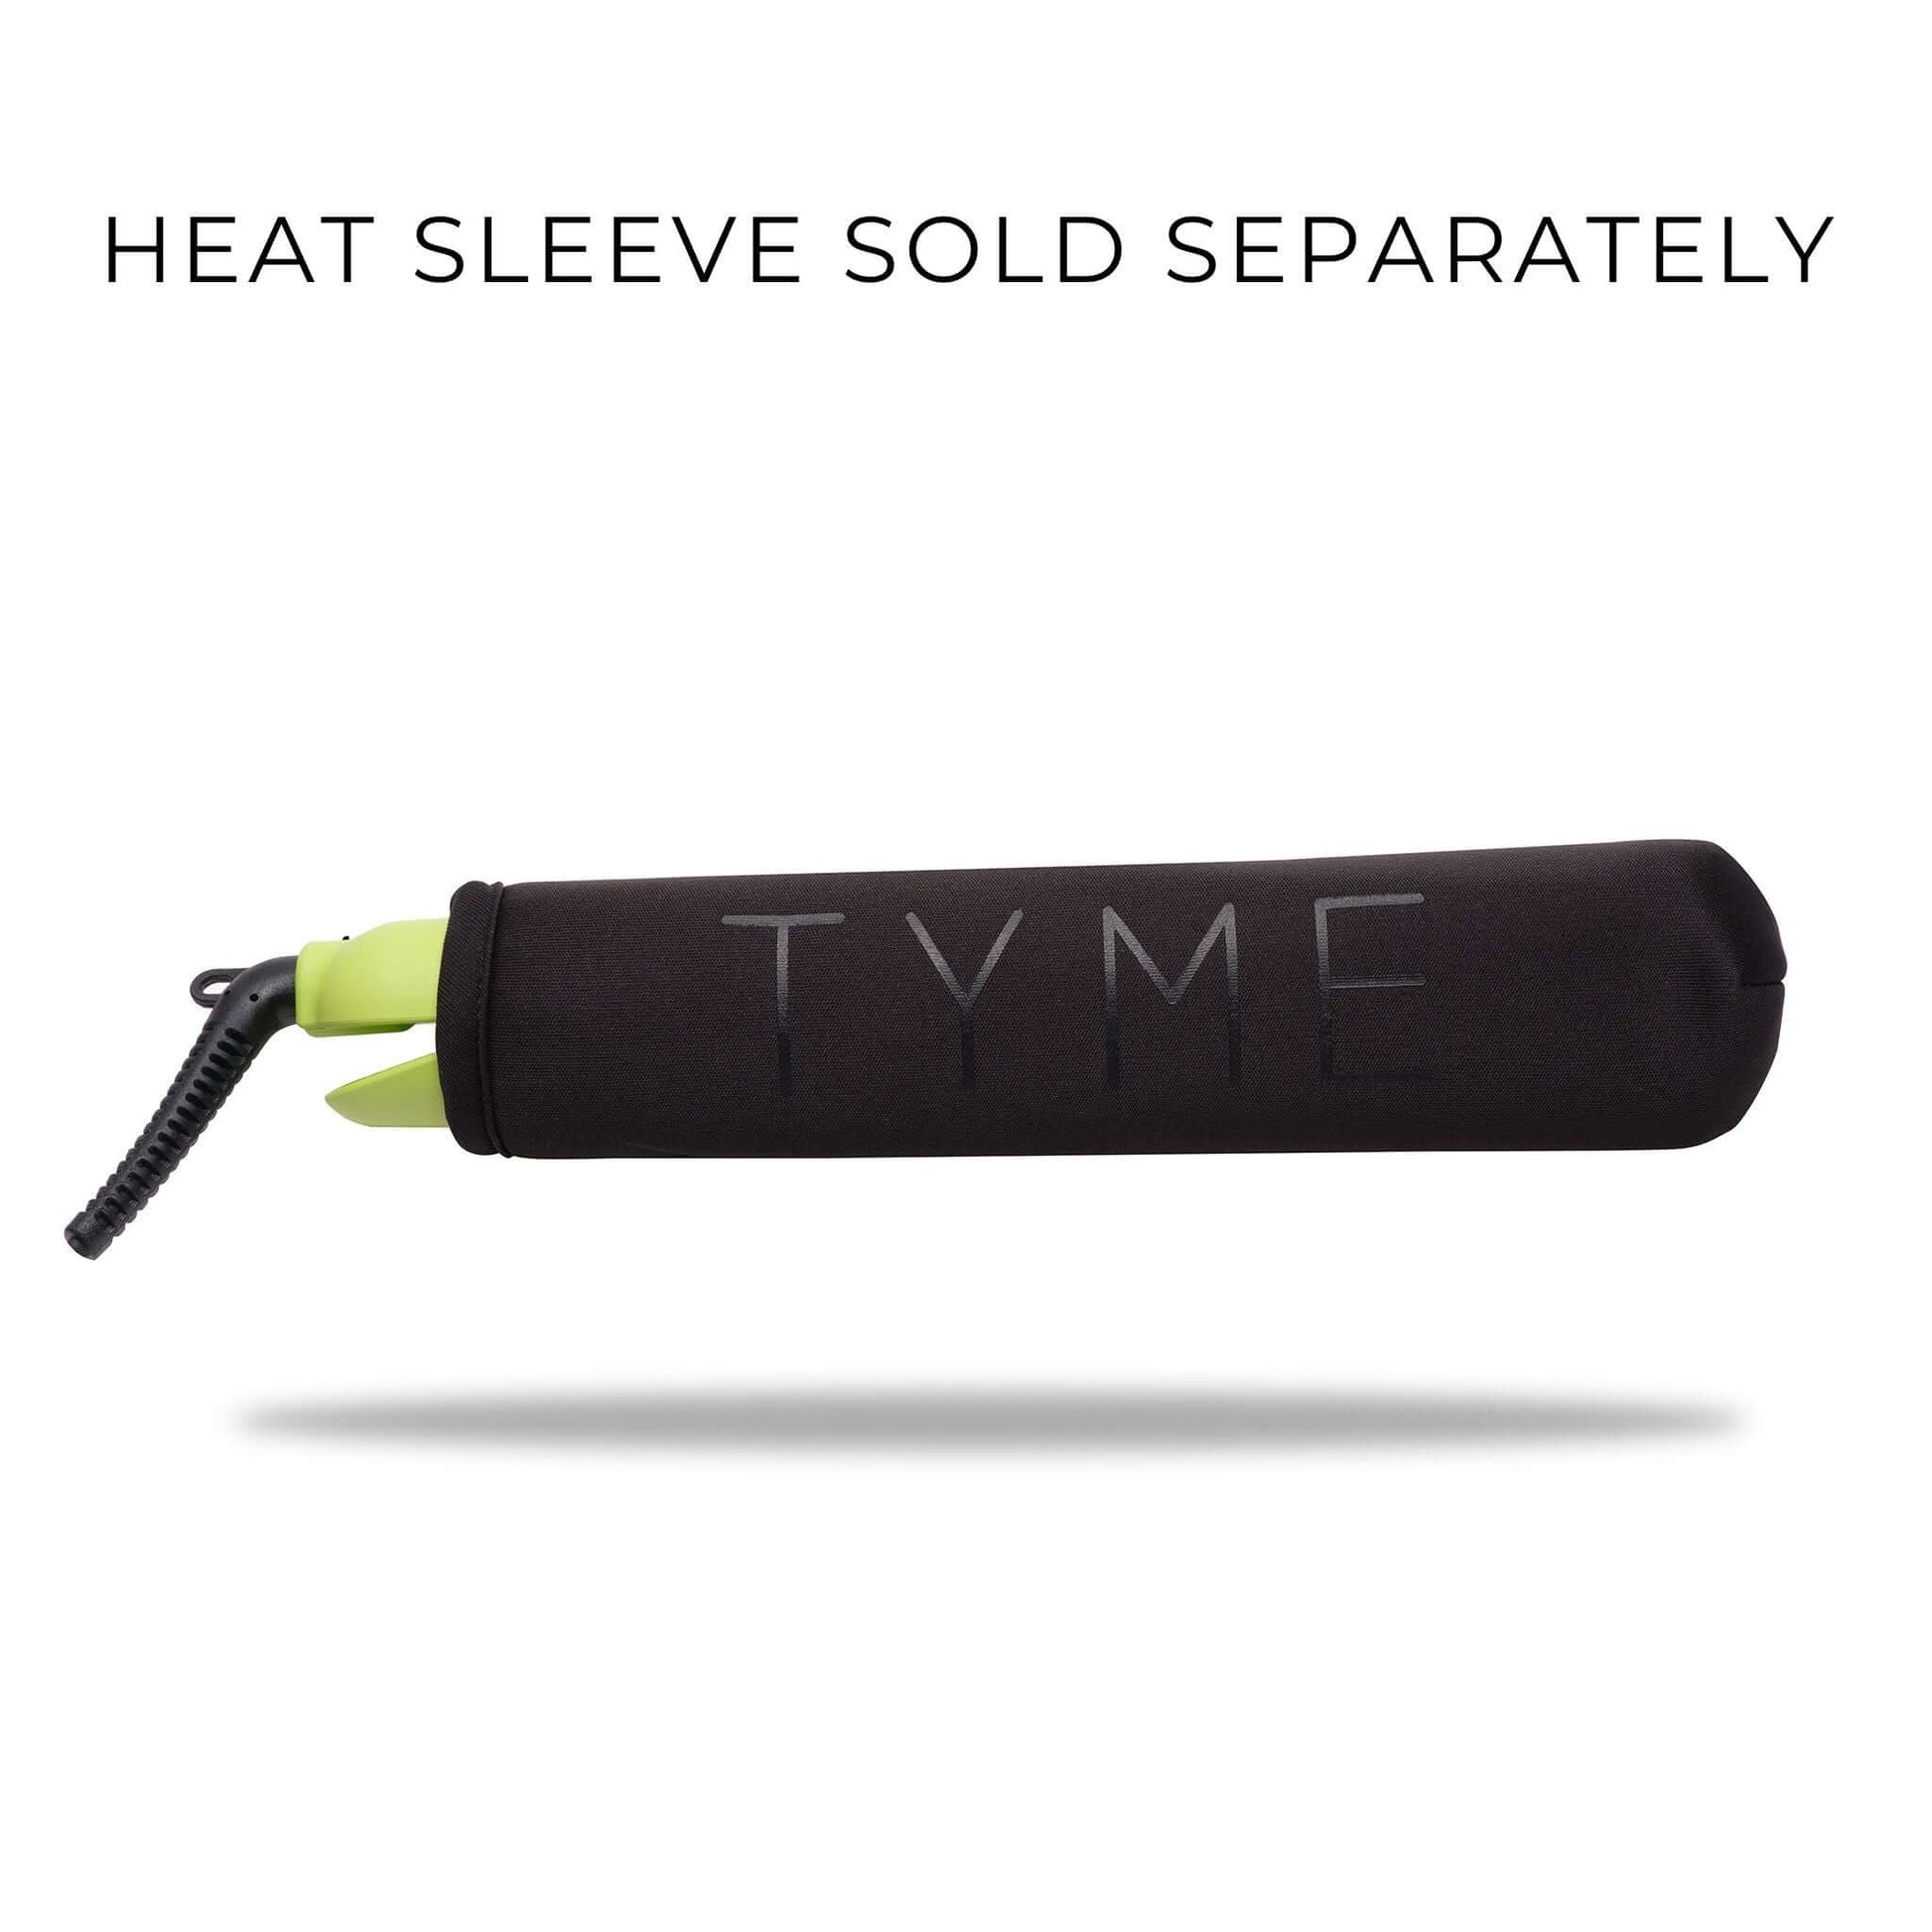 Purchase the heat sleeve separately for your TYME Iron Pro: Limelight.